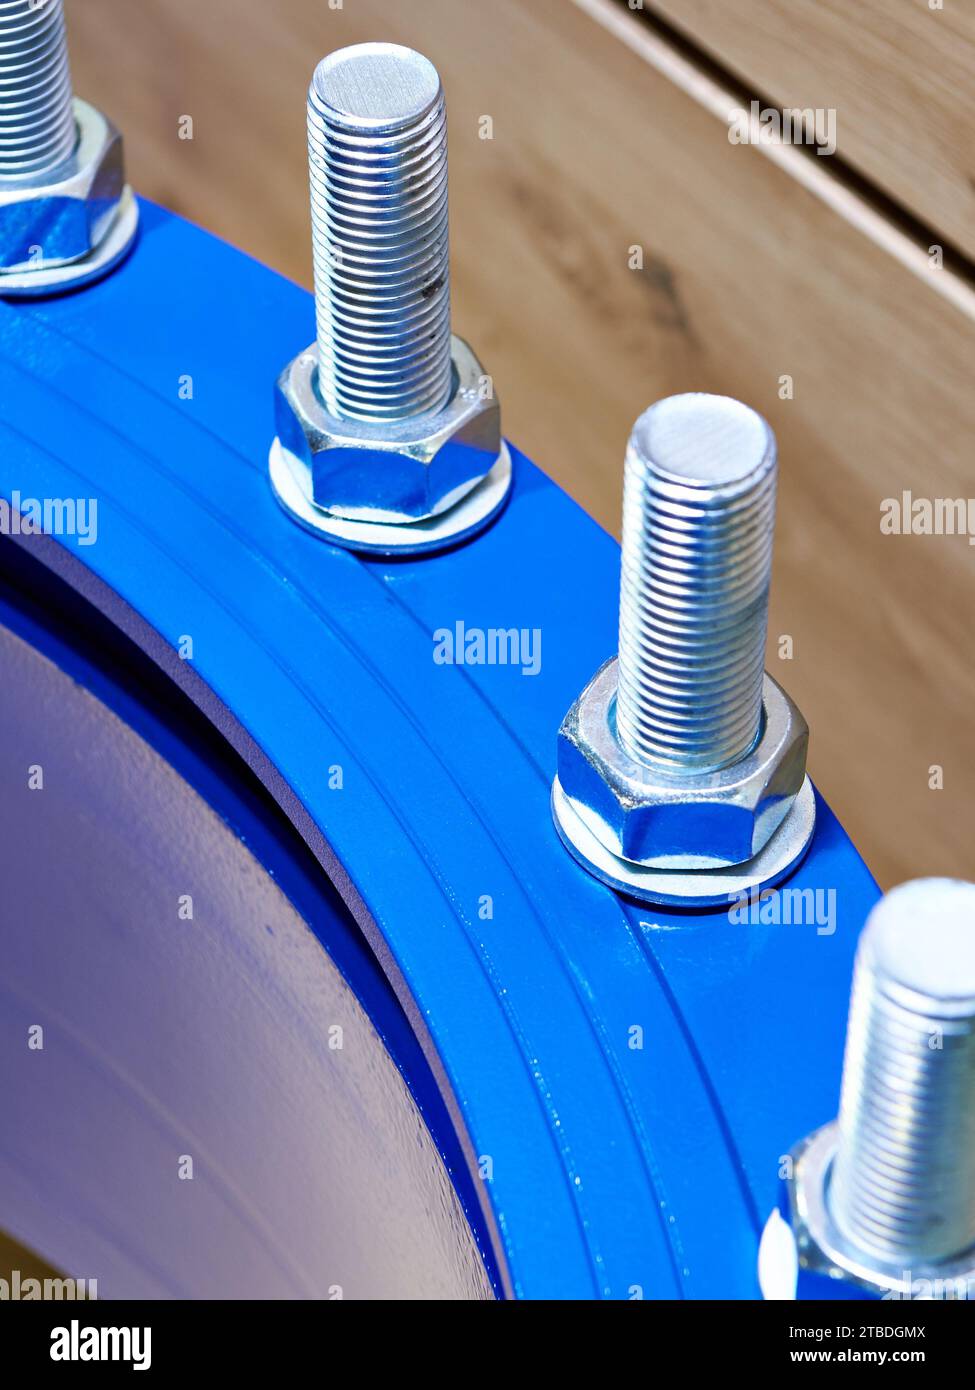 Bolts and nuts on the metal coupling of the water supply system Stock Photo